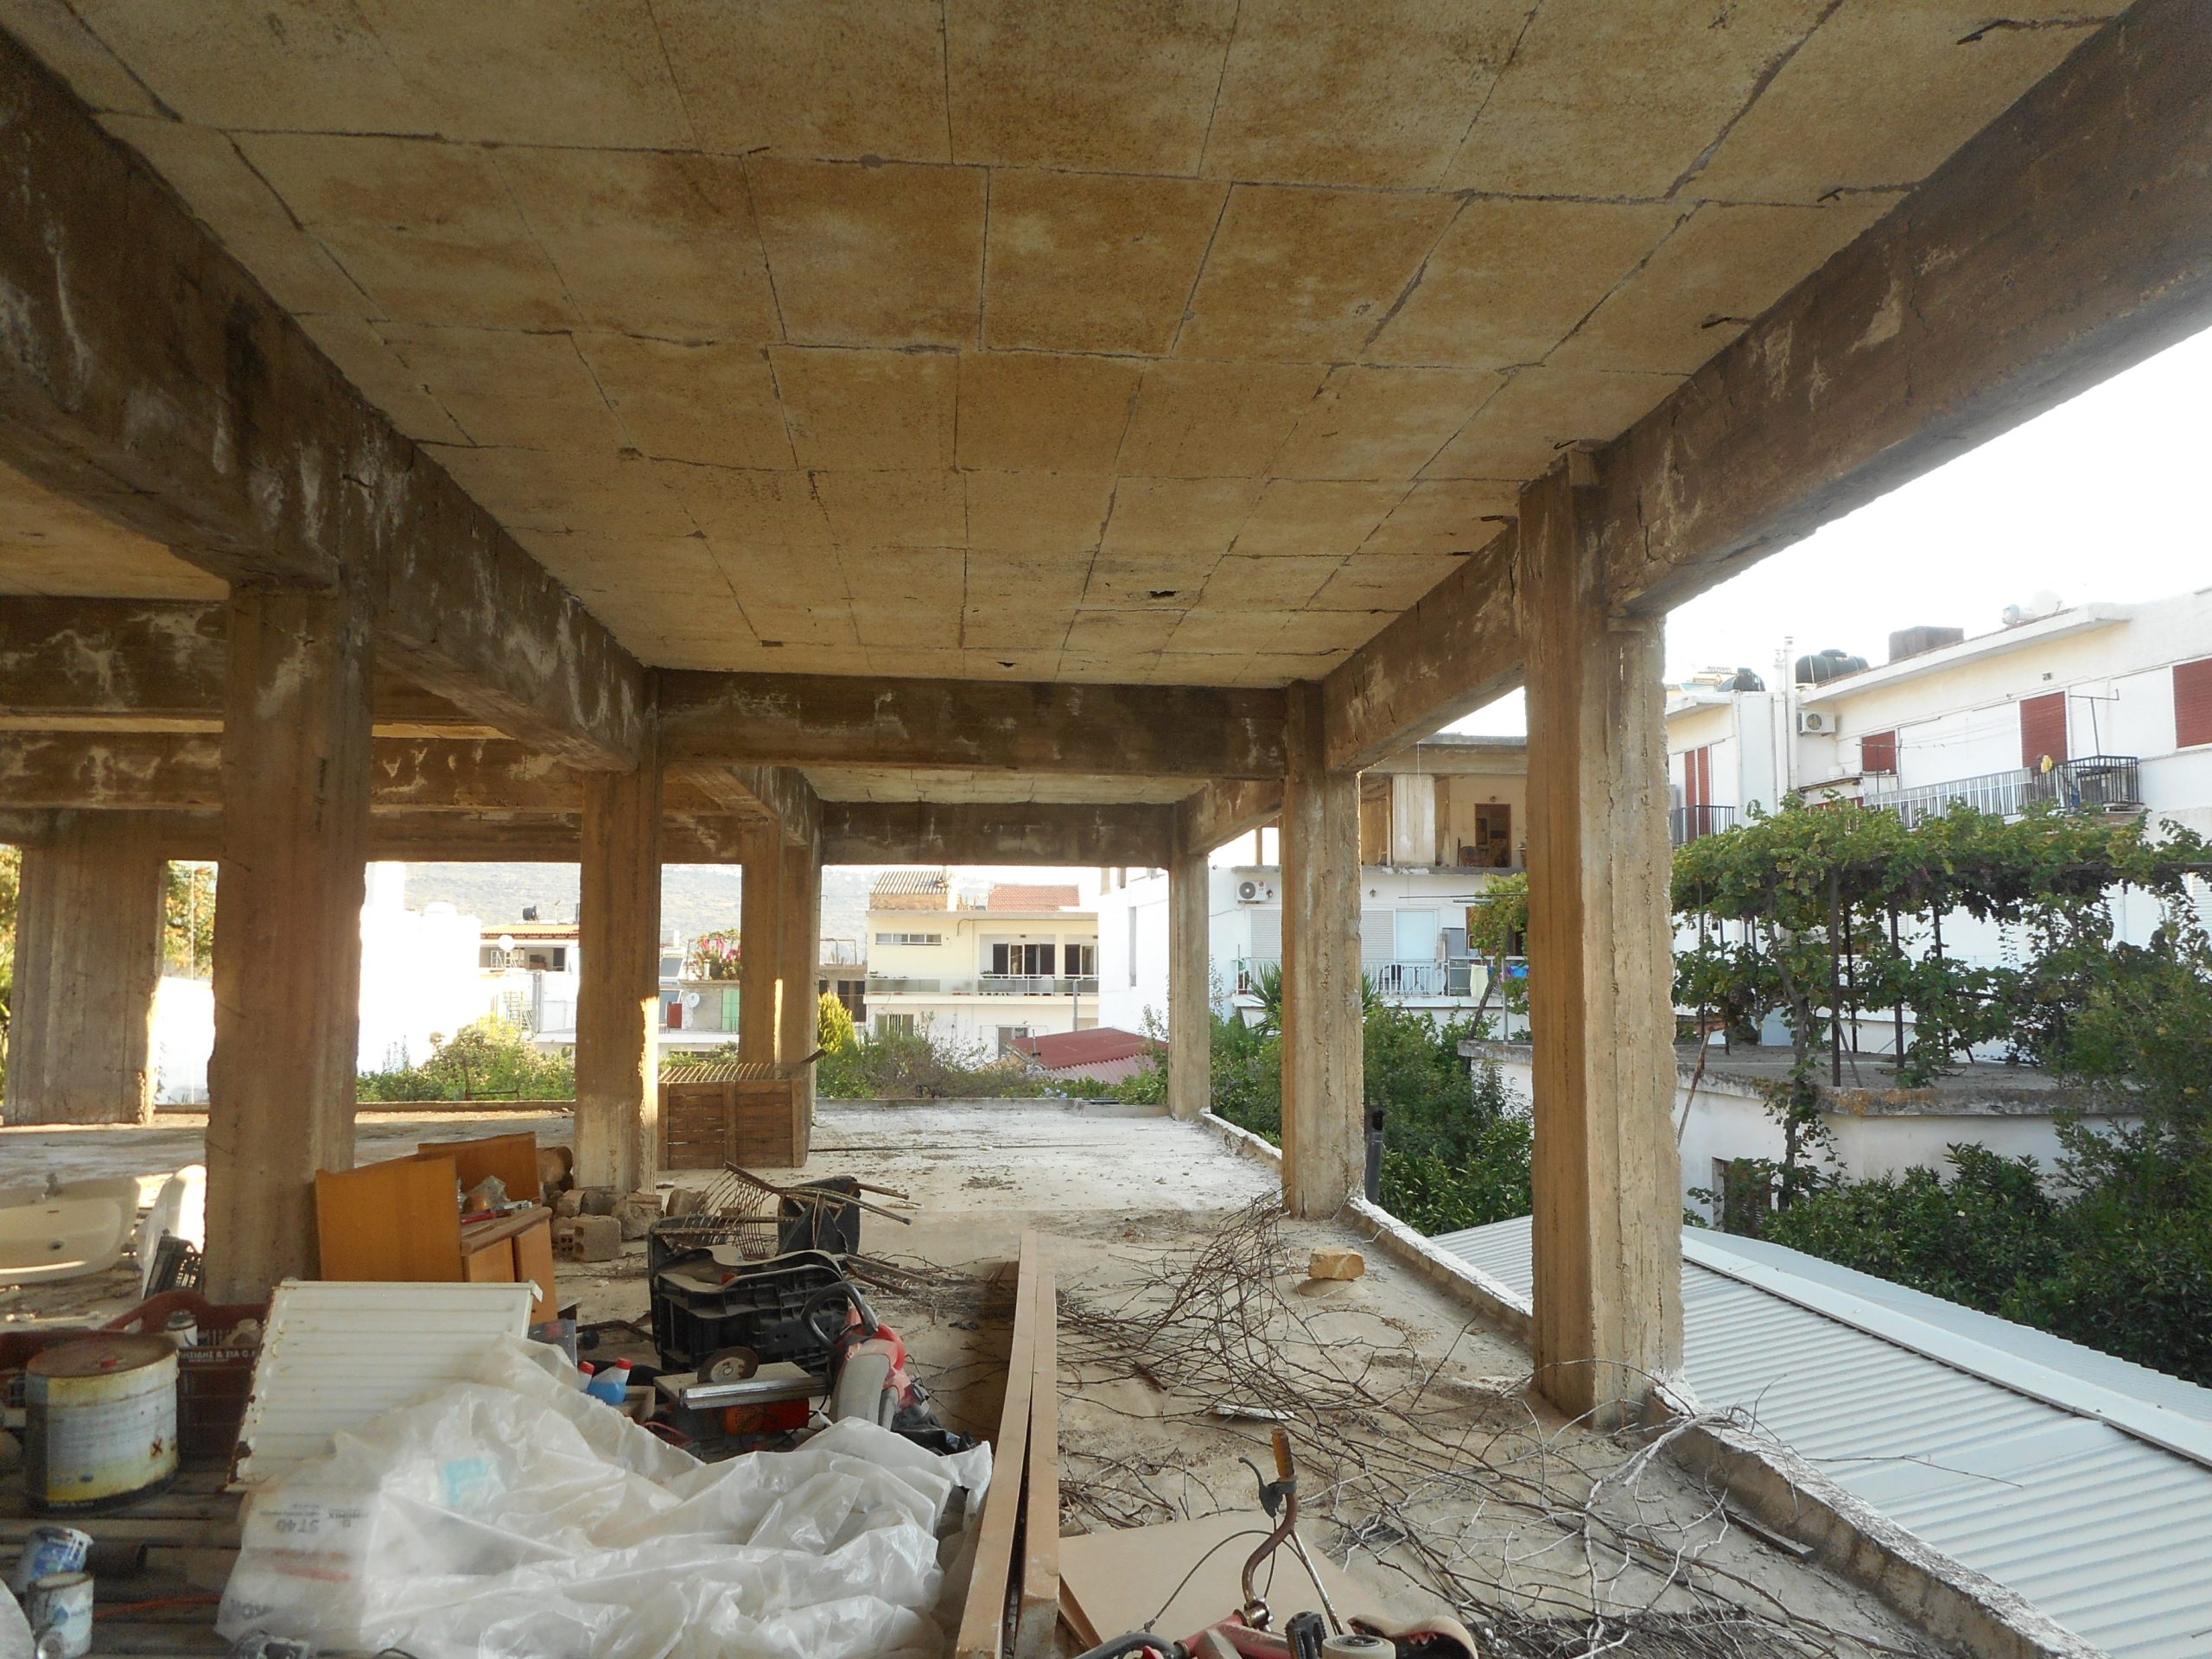 For sale in Souda, unfinished 1st floor building of 196 sq.m.